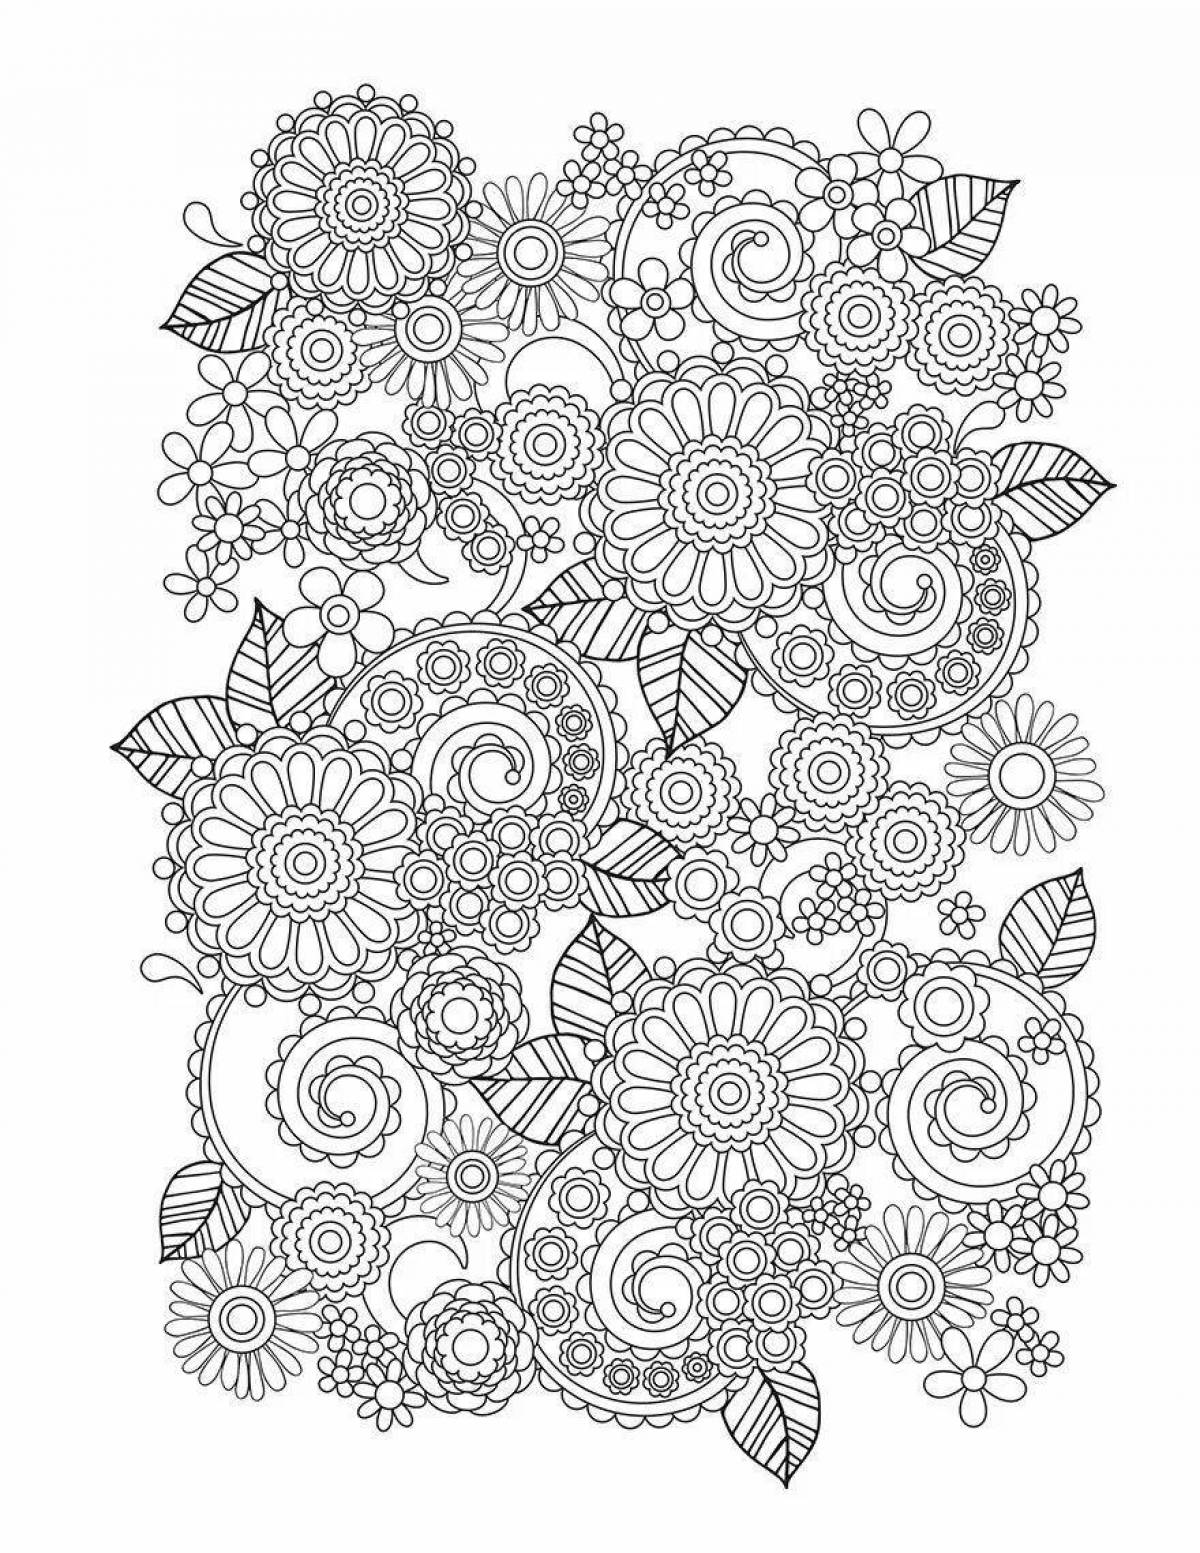 Playful coloring with small patterns